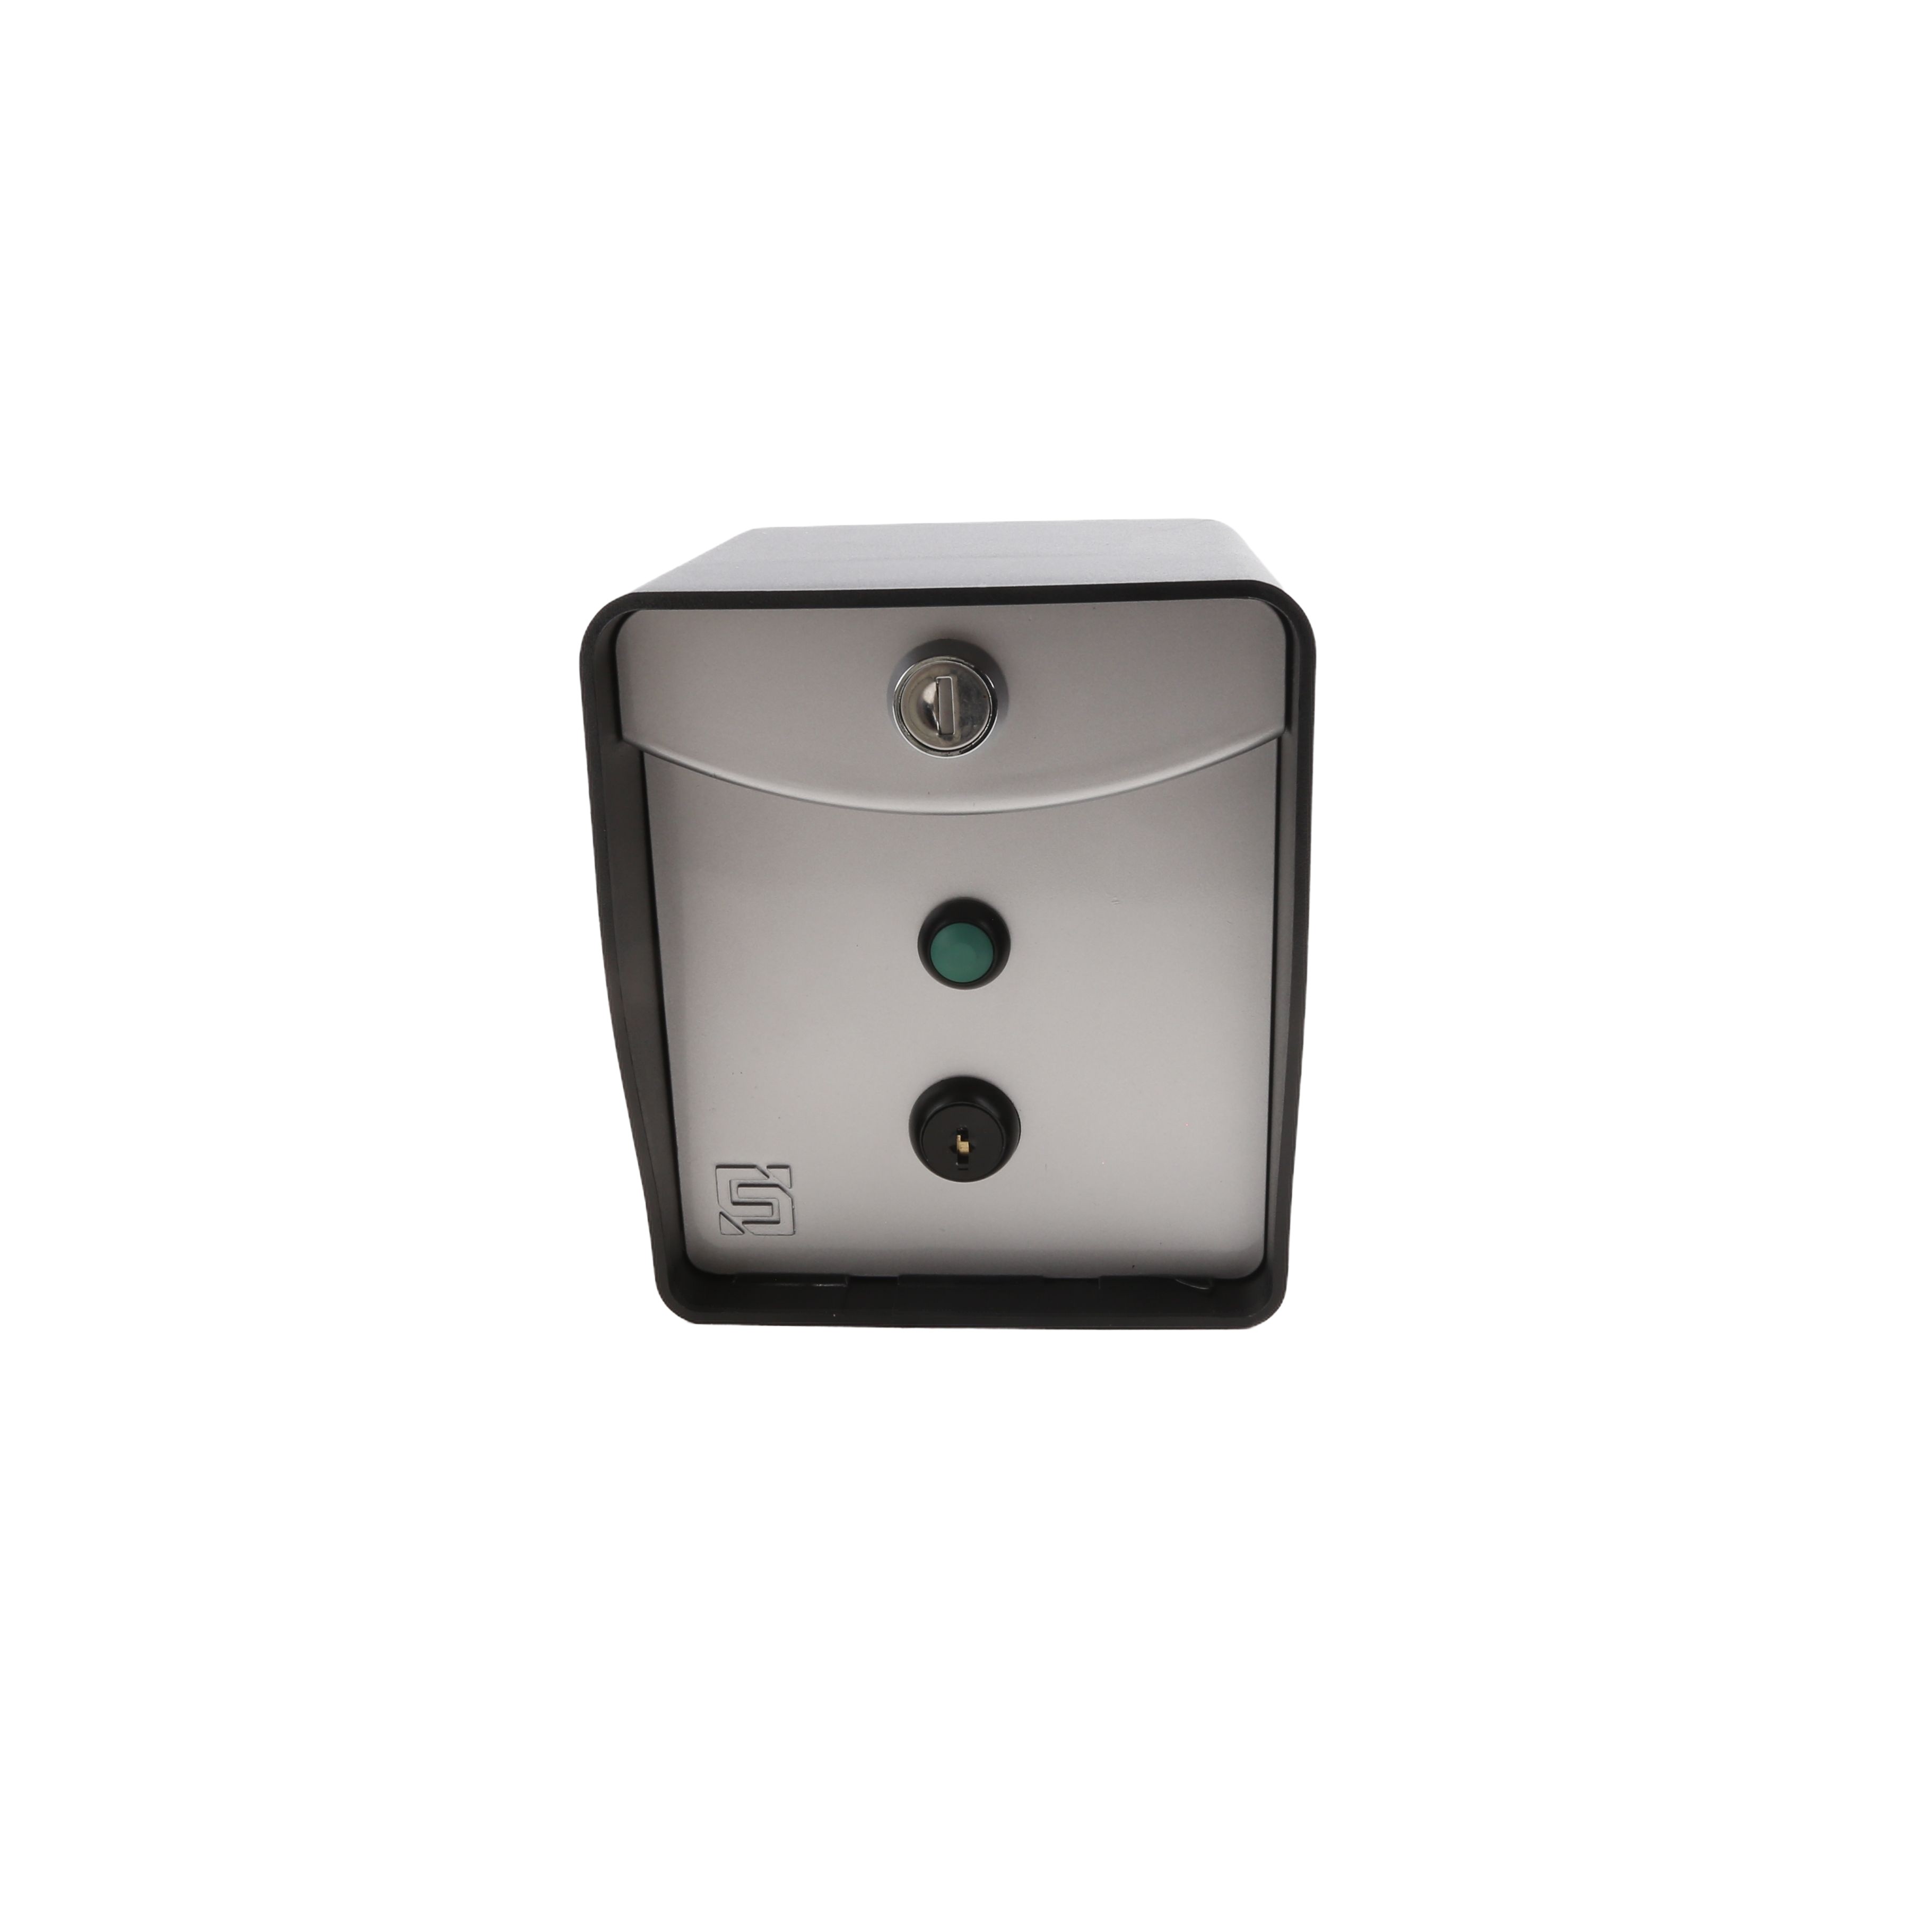 Request To Exit Wireless Push Button Post Mount Push Button Keypad for Nice  Apollo Gate Openers (433 MHz)